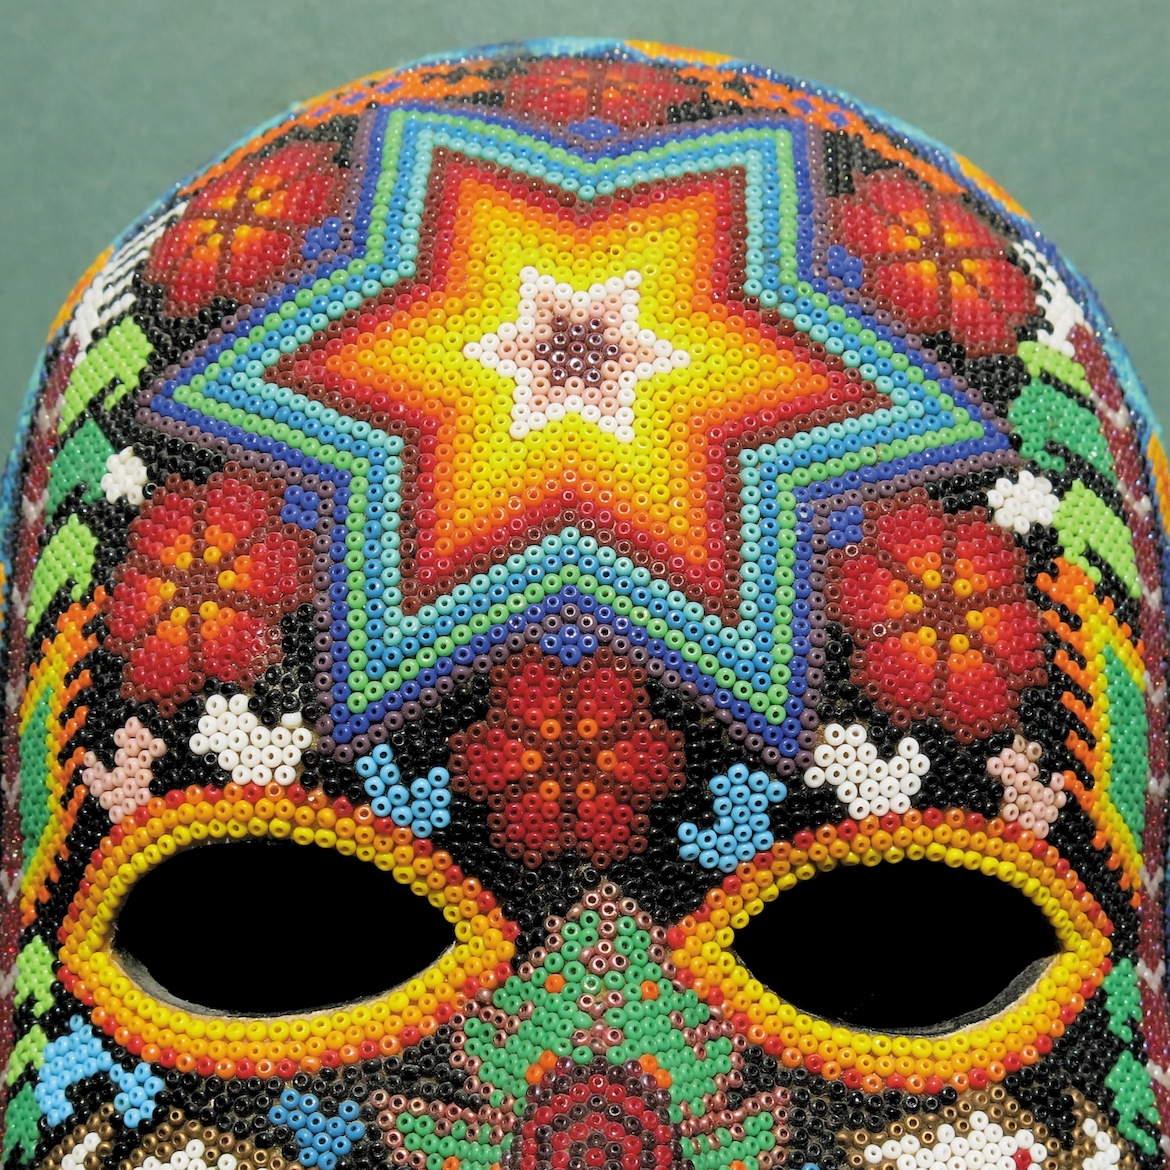 Dionysus Album Cover by Dead Can Dance